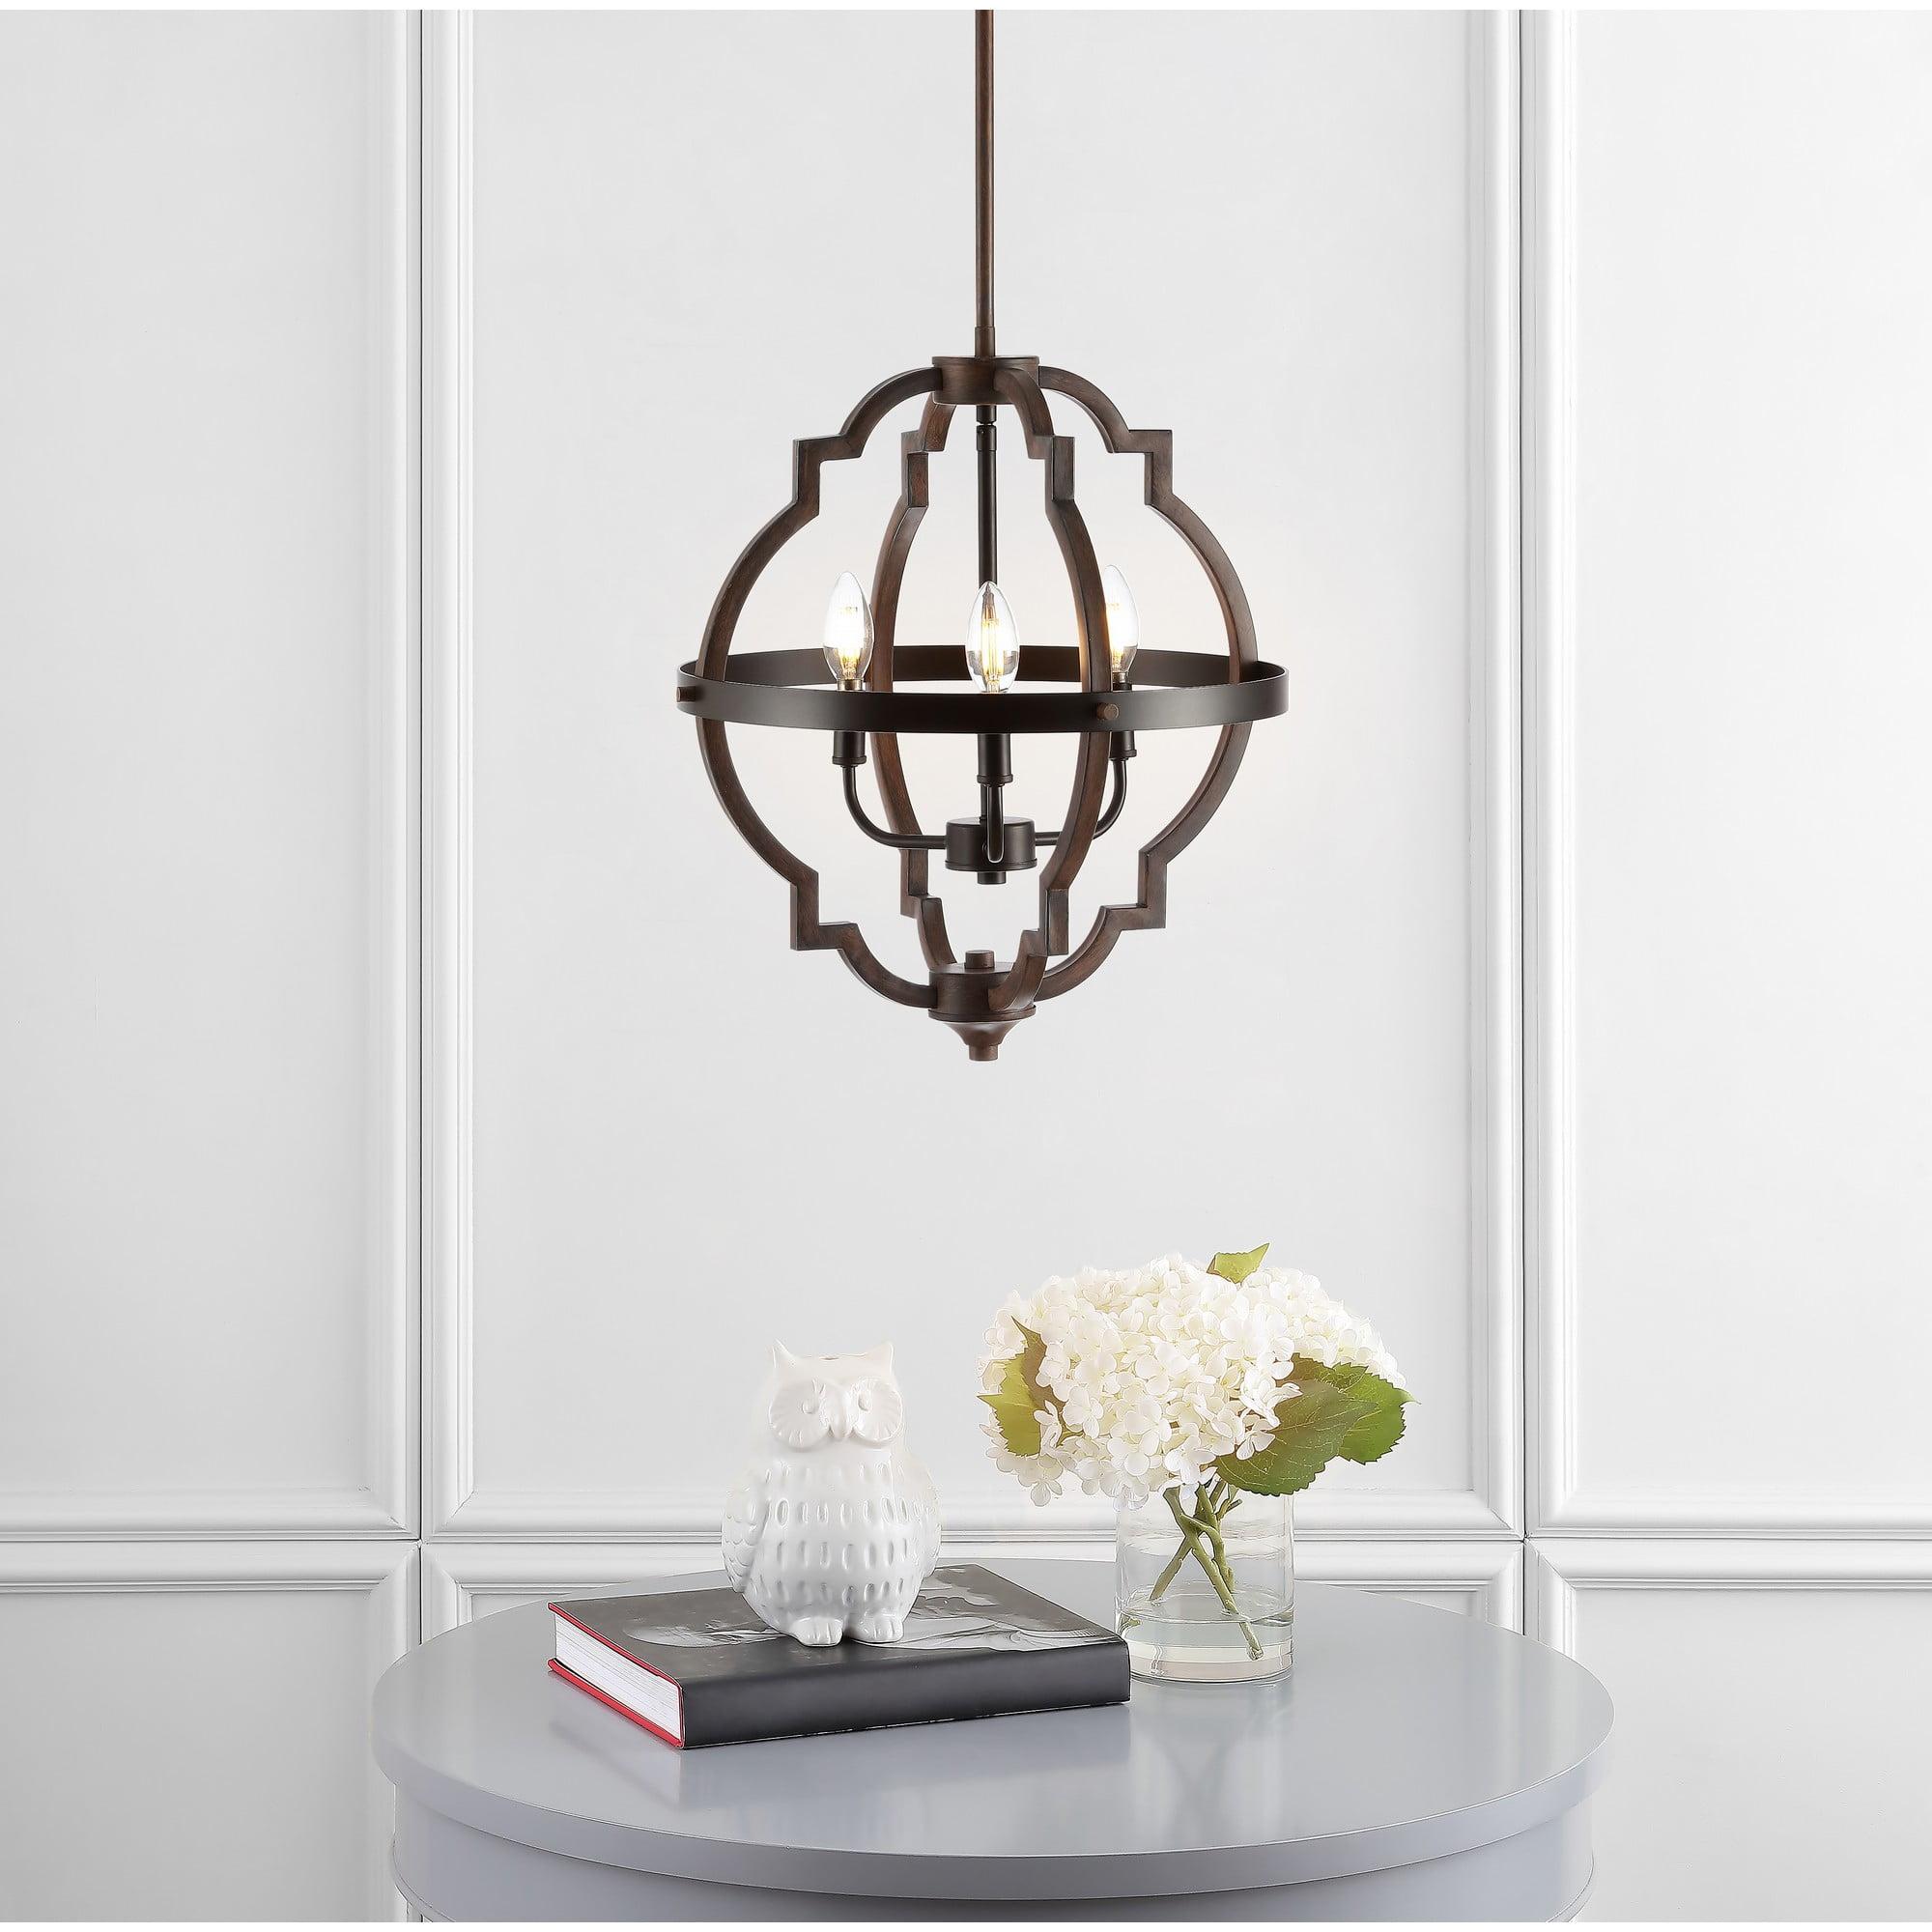 Rustic French Country 58" Adjustable LED Pendant in Oil-Rubbed Bronze